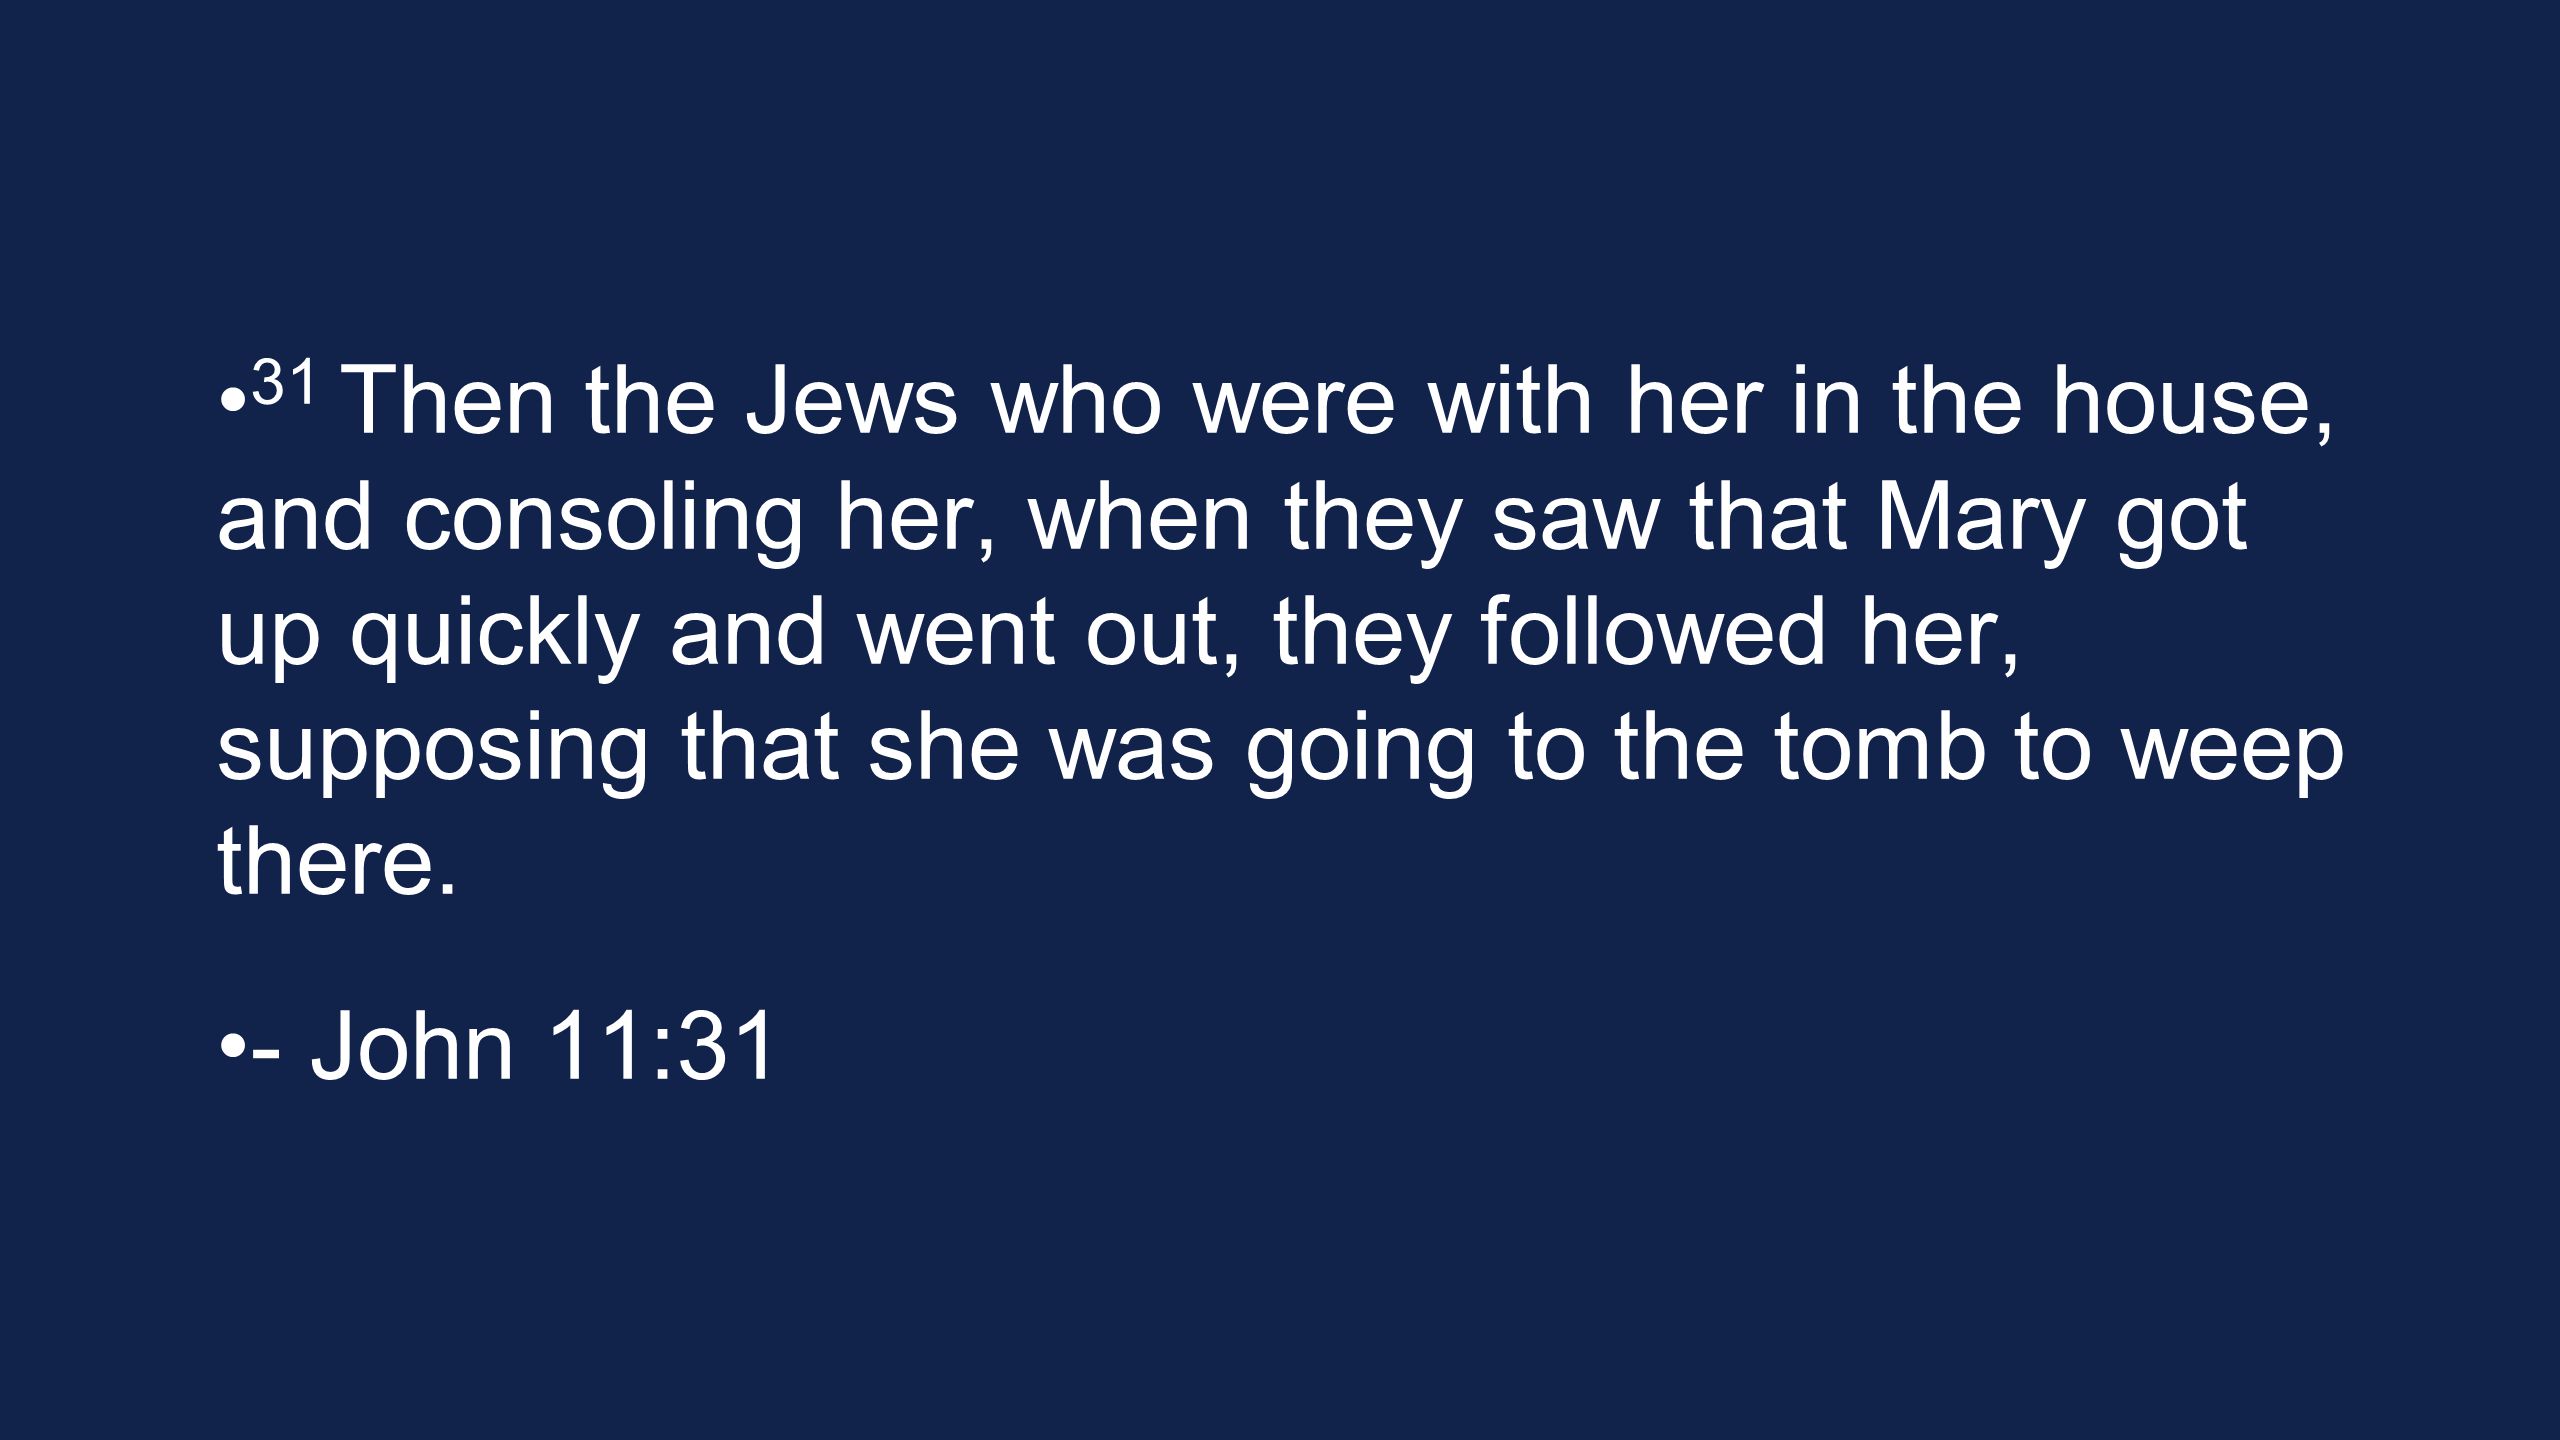 31 Then the Jews who were with her in the house, and consoling her, when they saw that Mary got up quickly and went out, they followed her, supposing that she was going to the tomb to weep there.